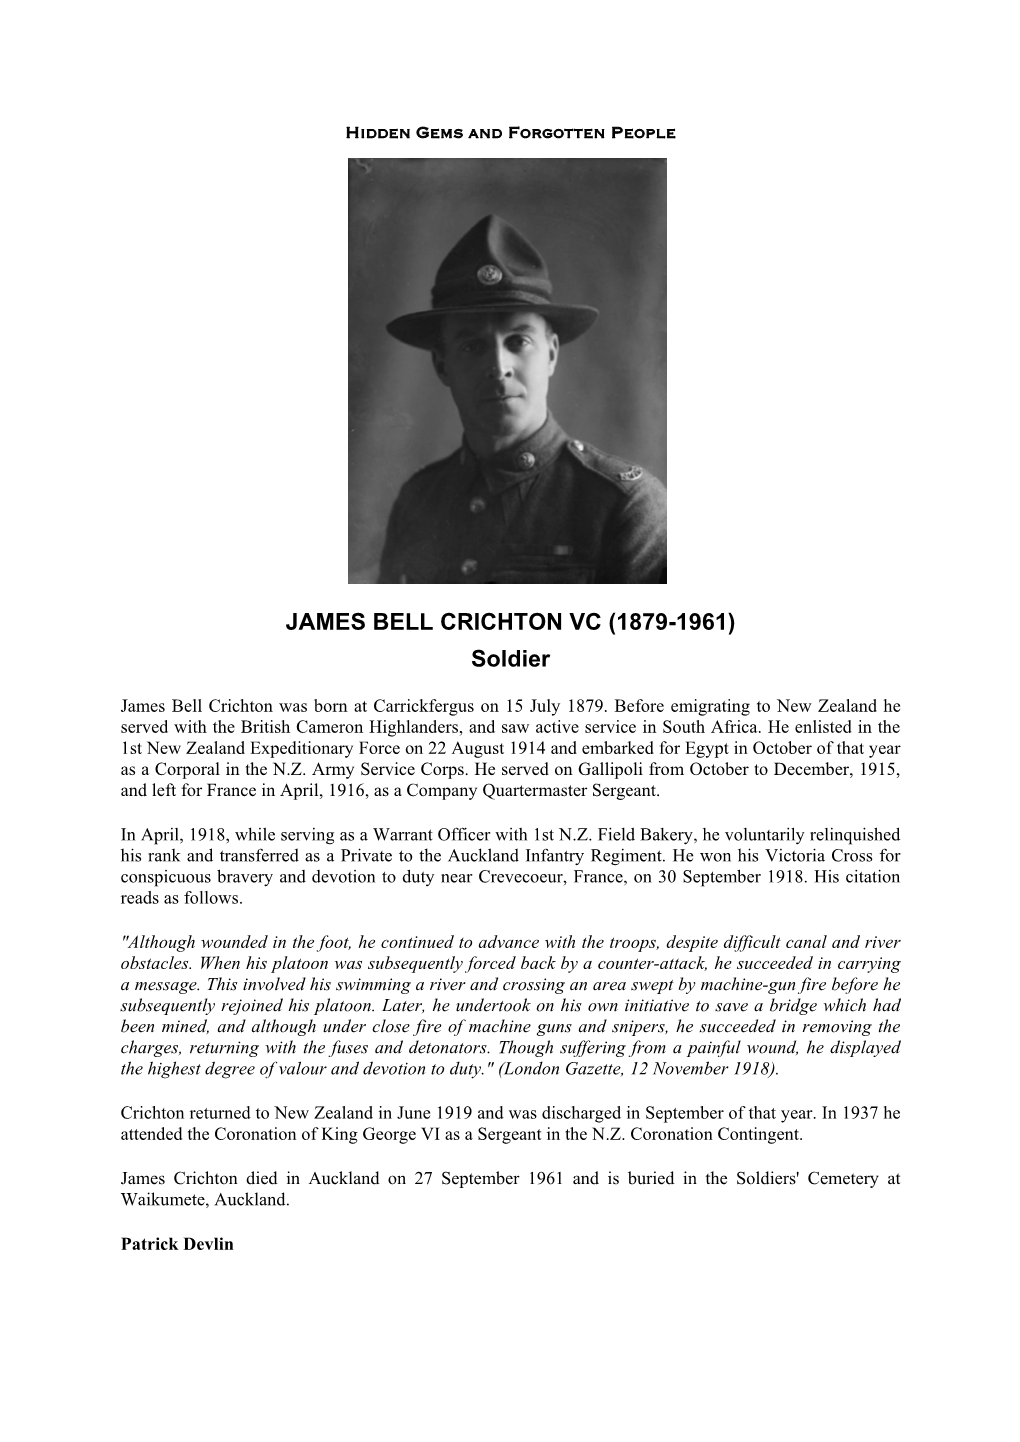 JAMES BELL CRICHTON VC (1879-1961) Soldier